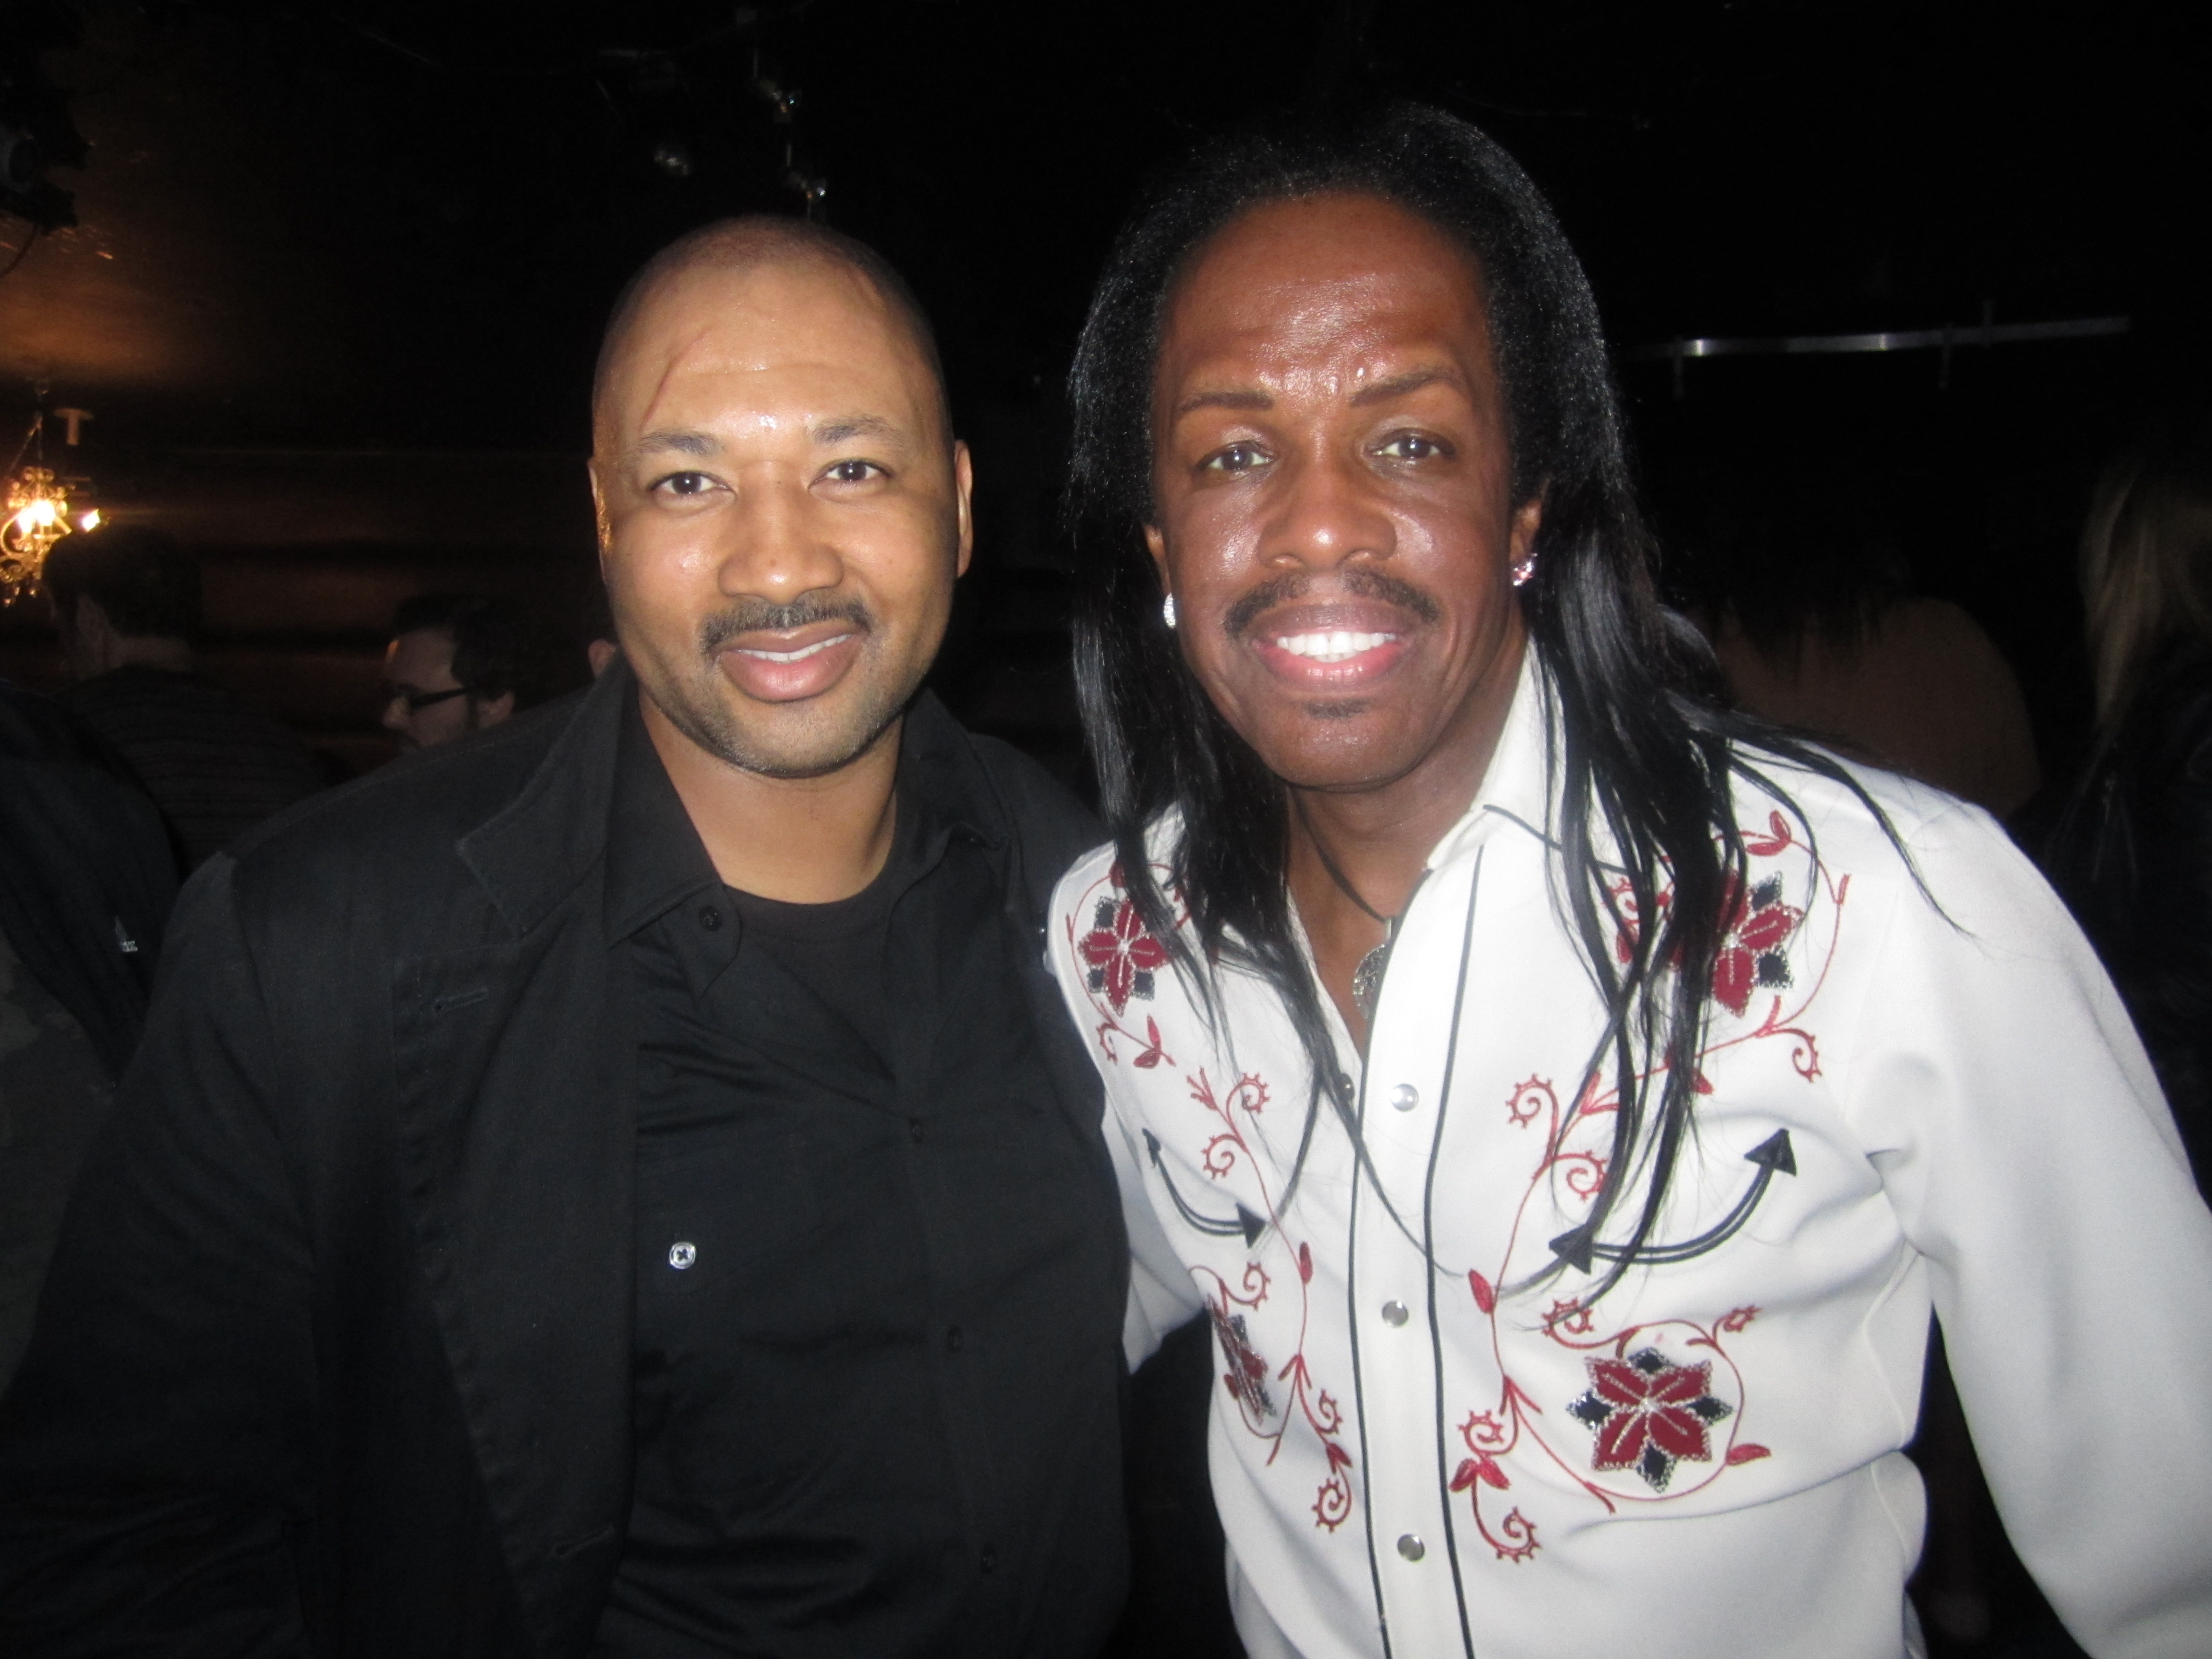 Alex Al with Earth, Wind & Fire's legendary bassist, Verdine White after performing together at live TV show. Alex supported the legendary band on keyboards and bass.